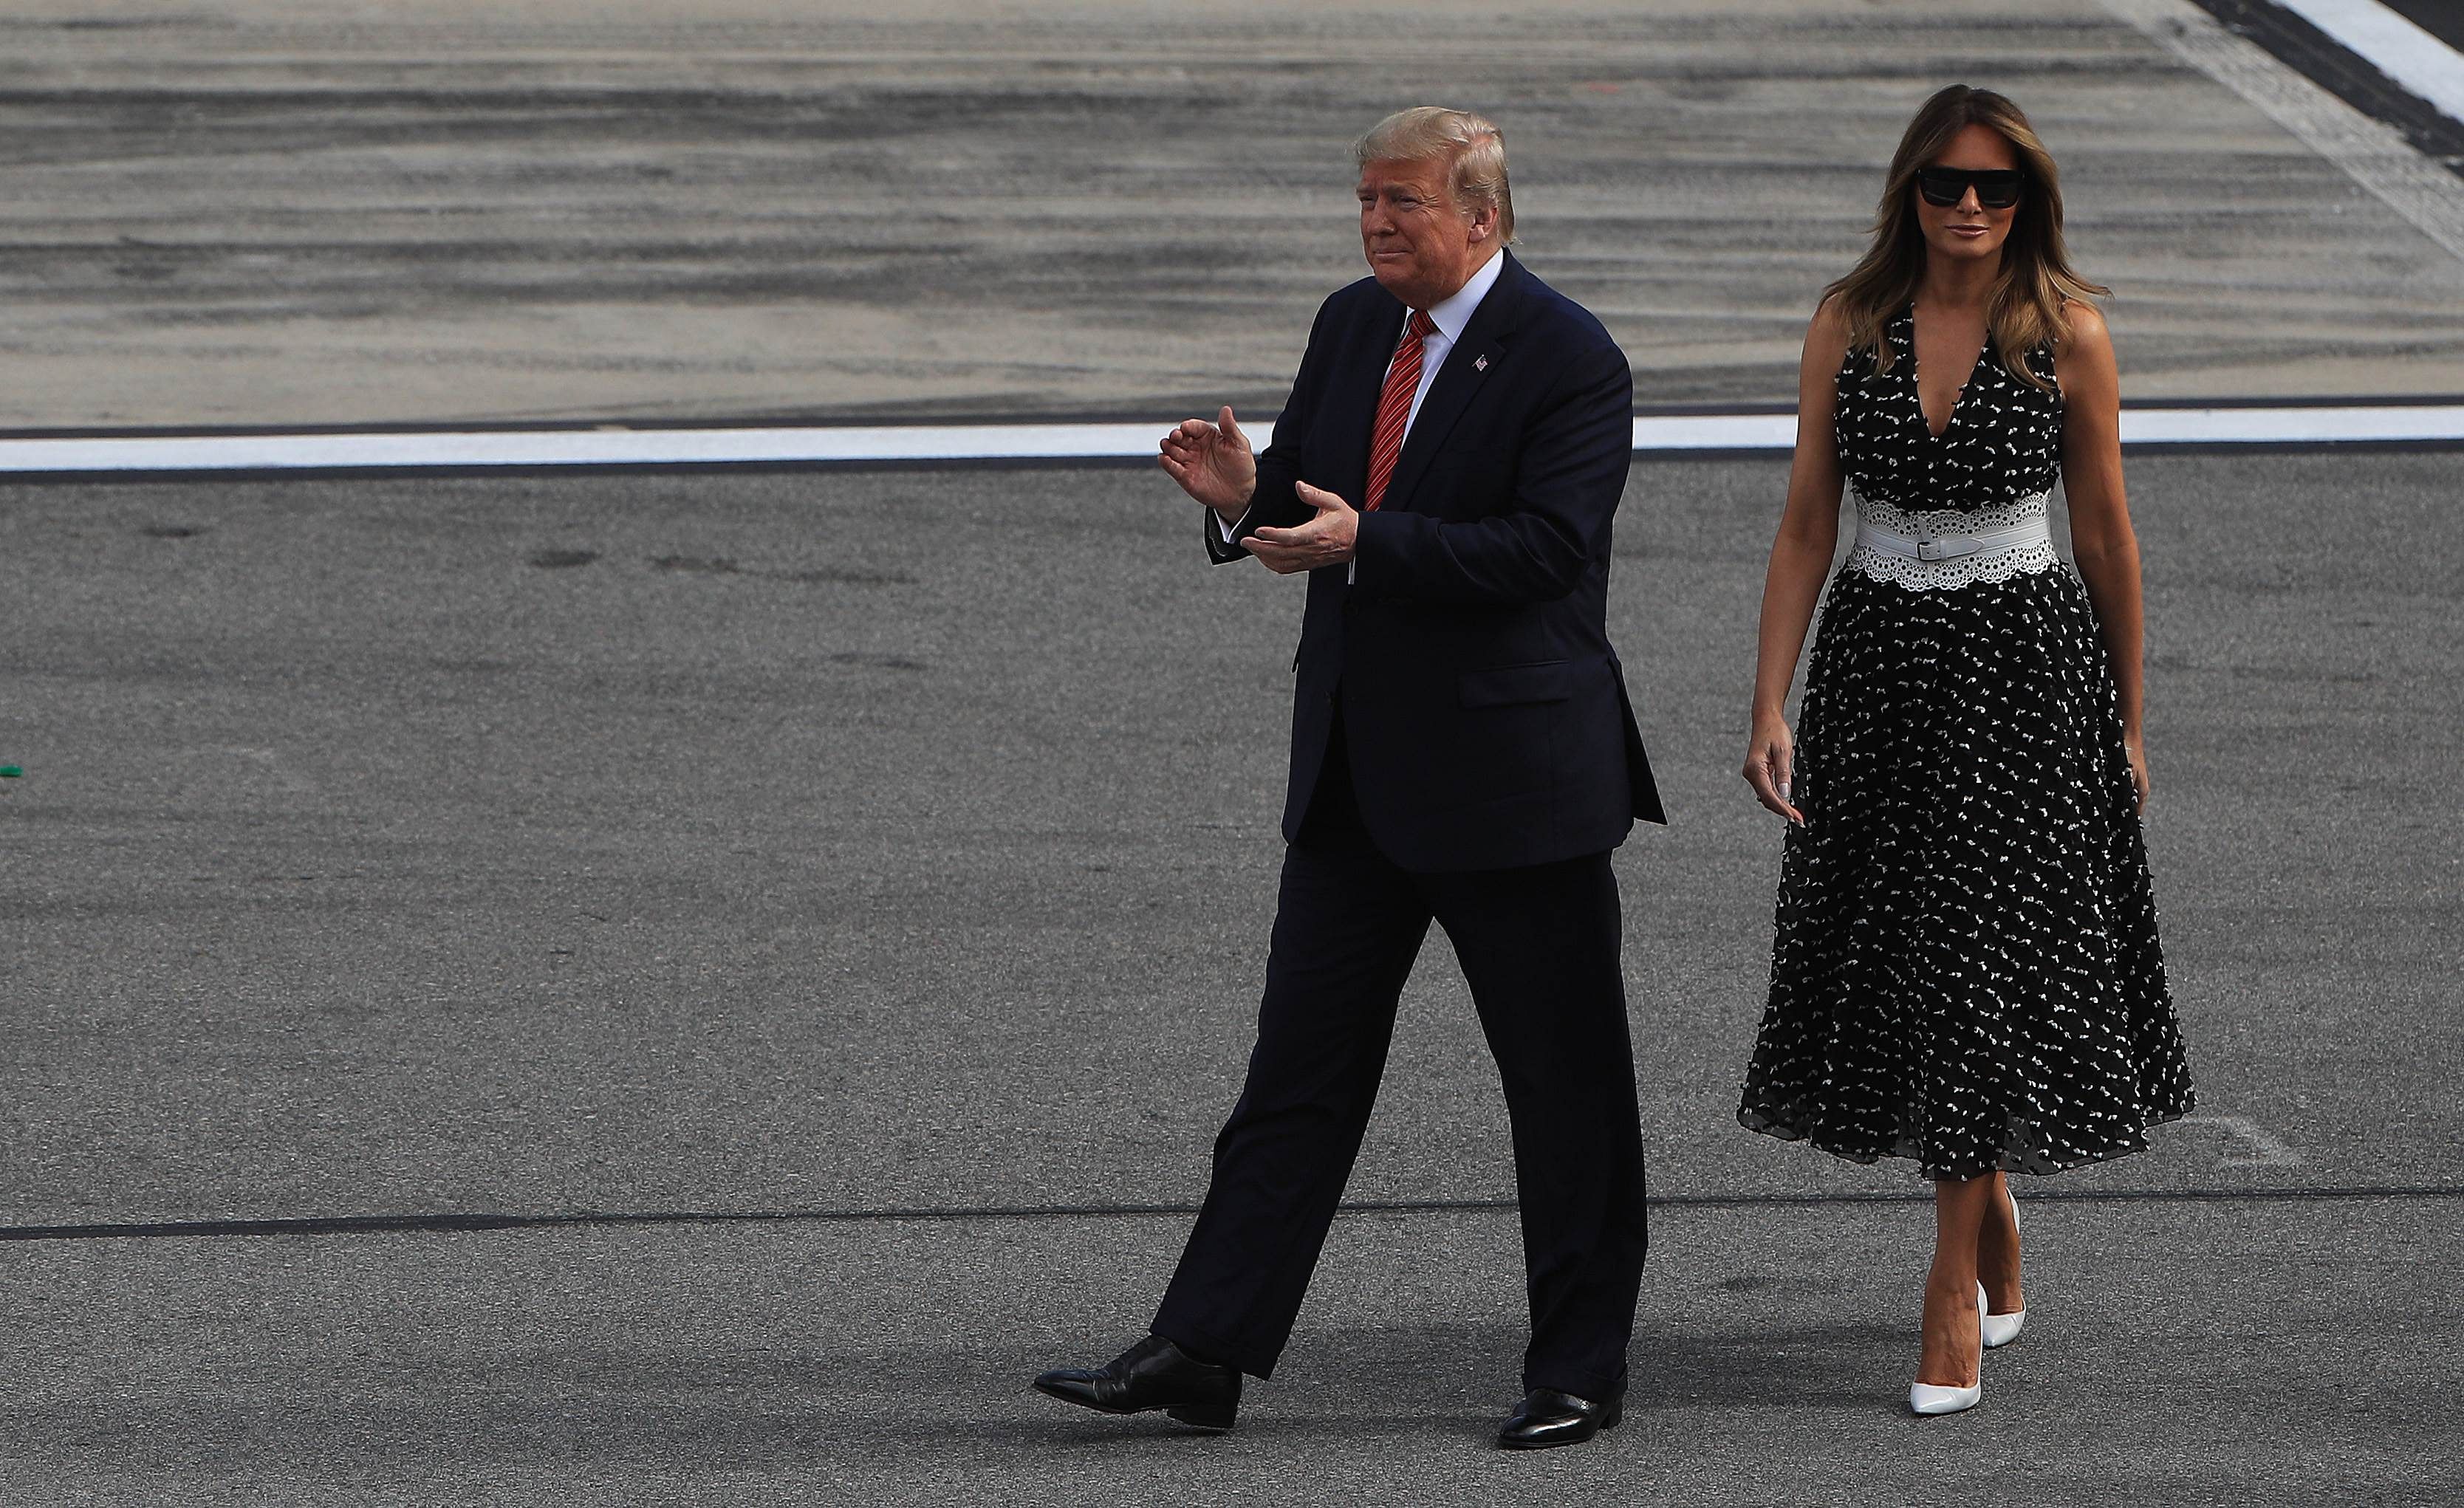 United States President Donald Trump and First Lady Melania Trump. (PTI Photo)